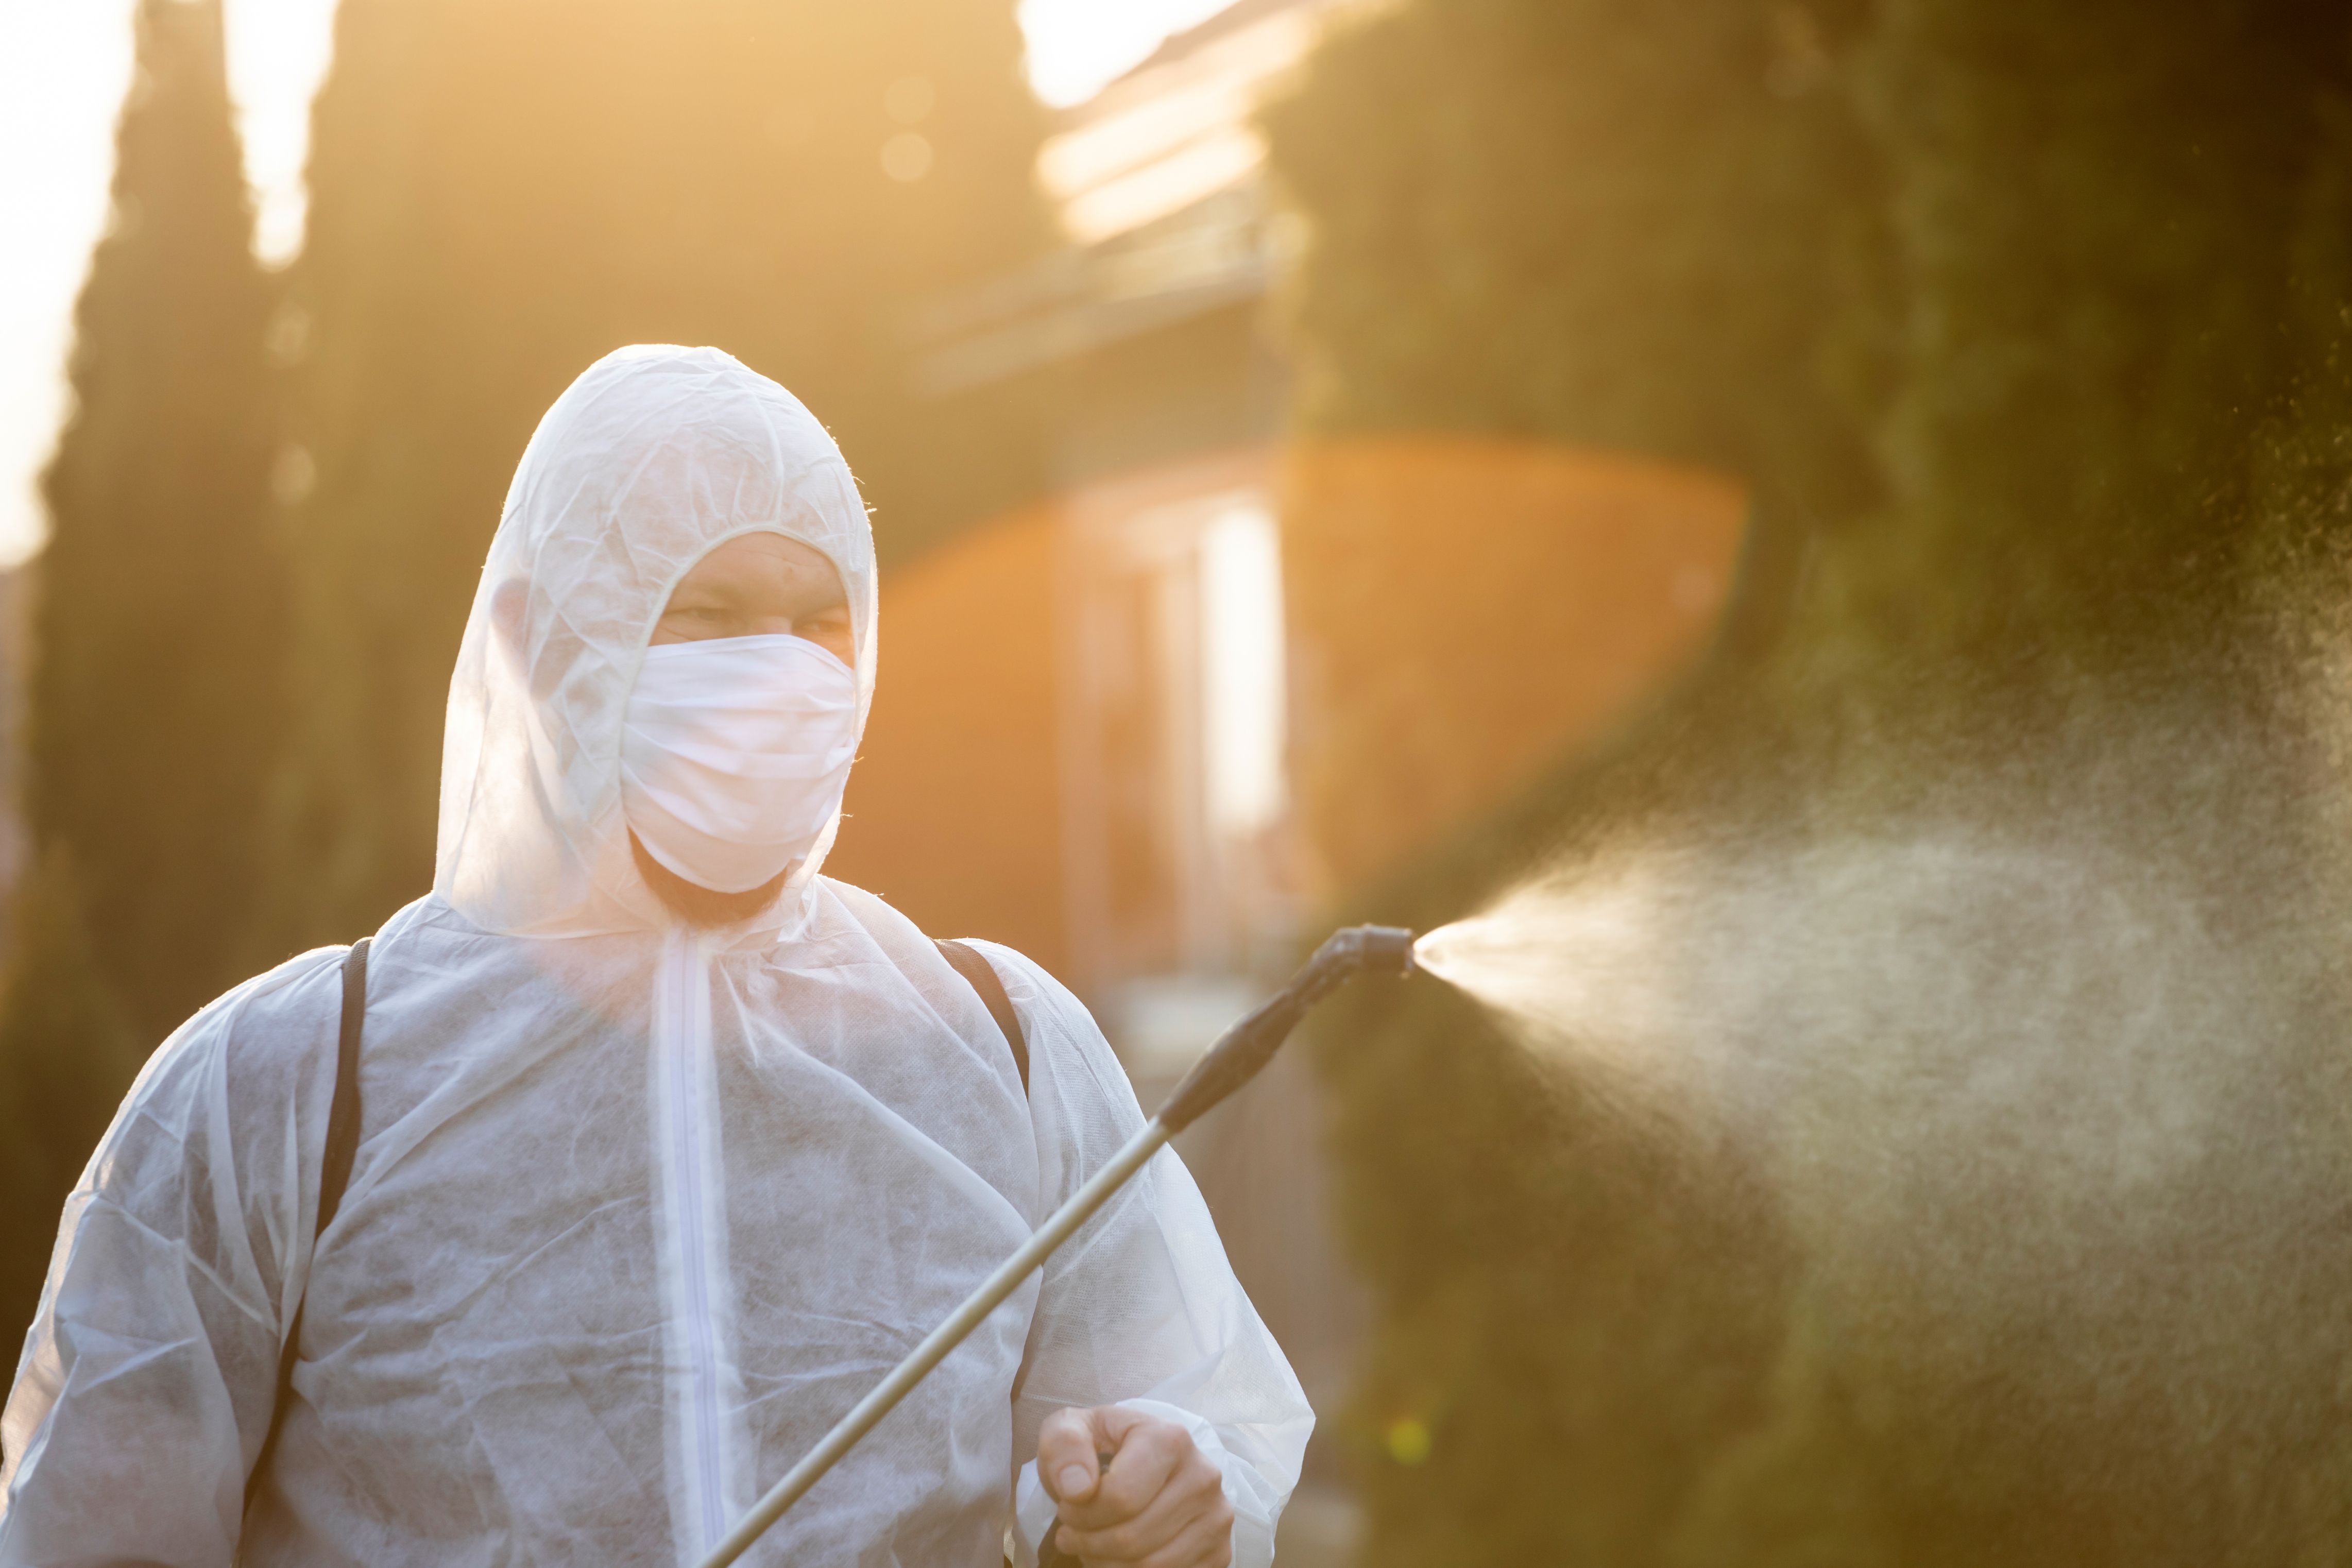 Find Commercial Disinfecting Services